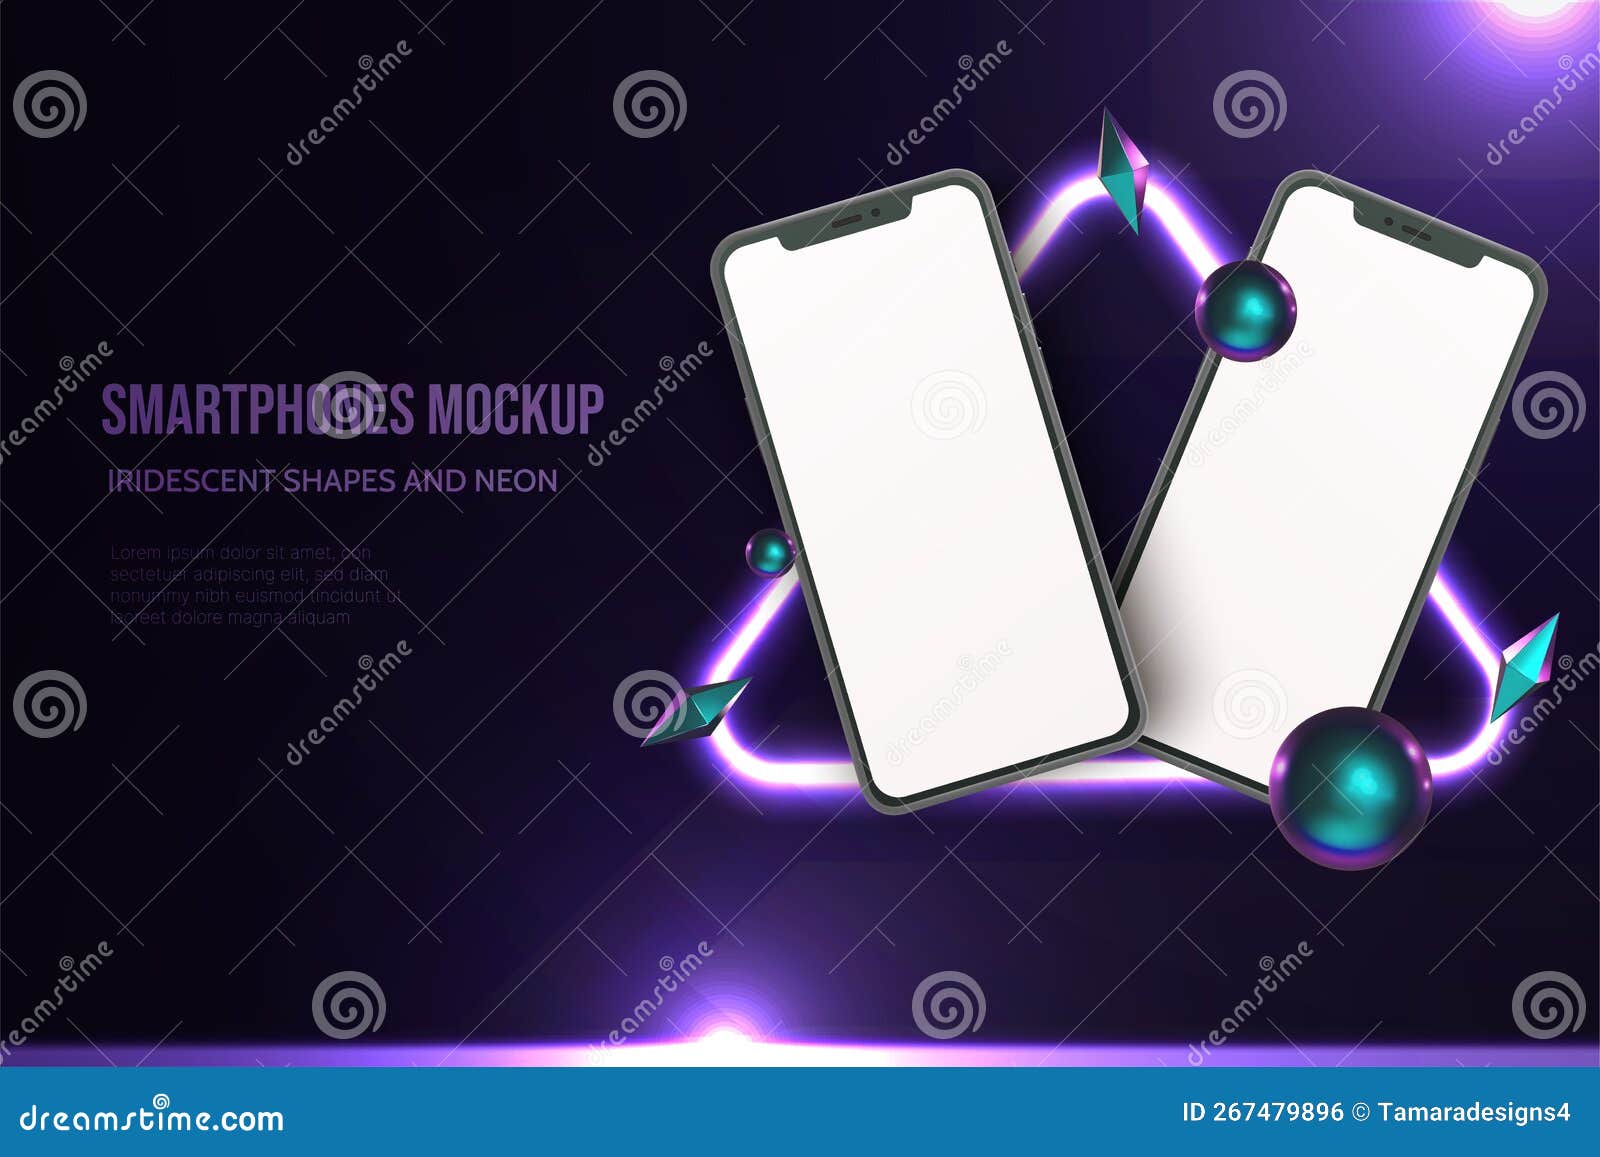 smartphone mockup with irridescent s and neon sign